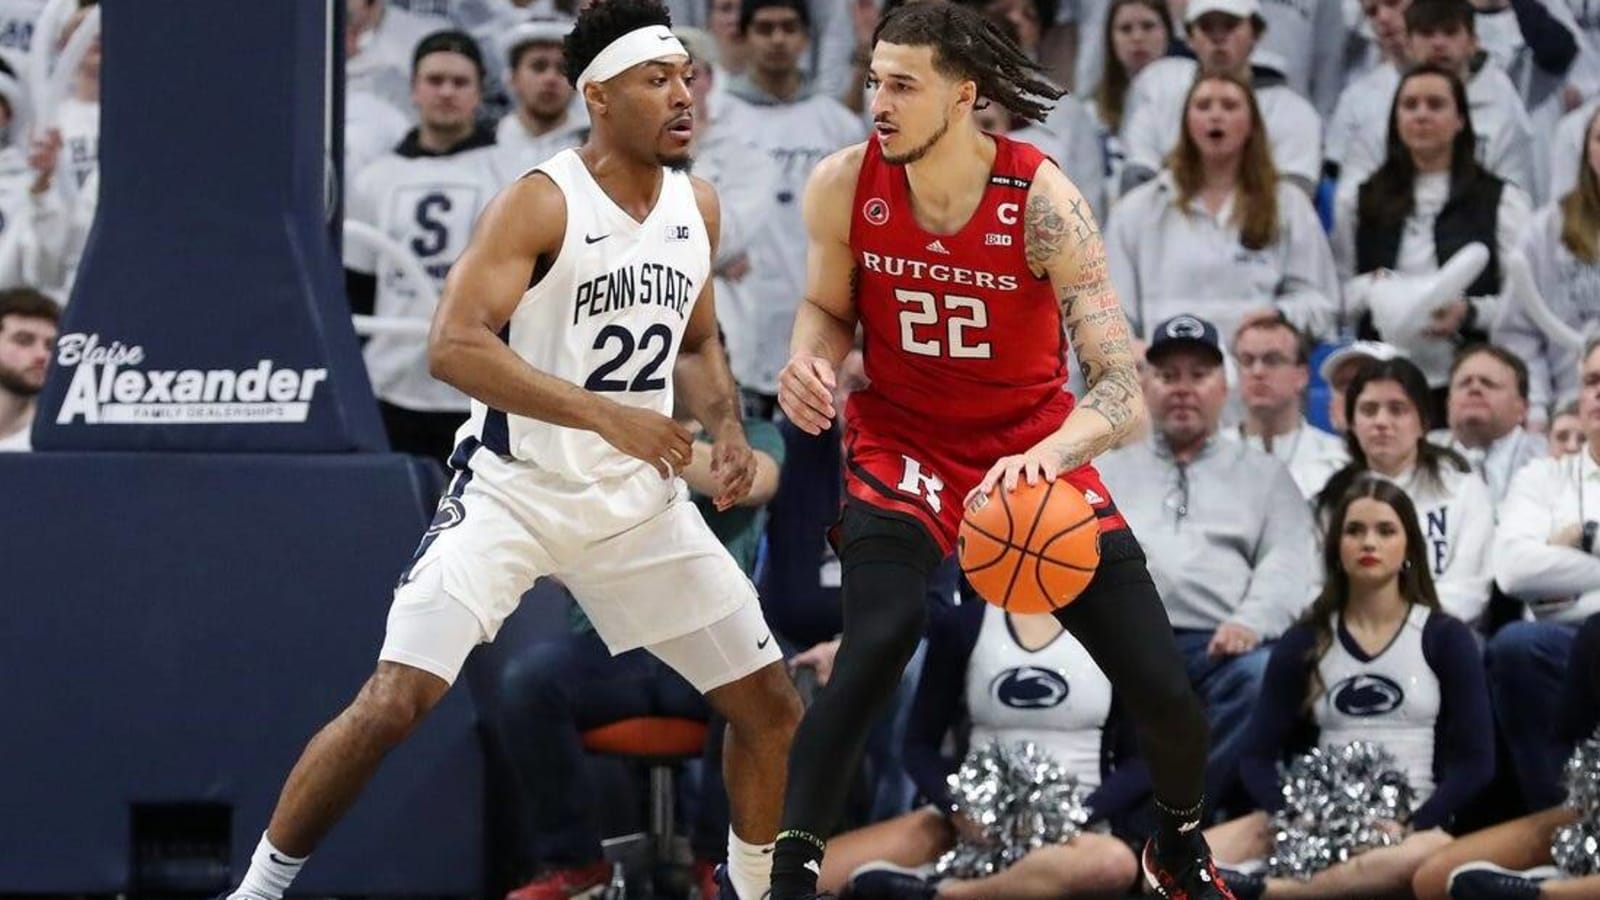 Rutgers charges back from down 19 to shock Penn State